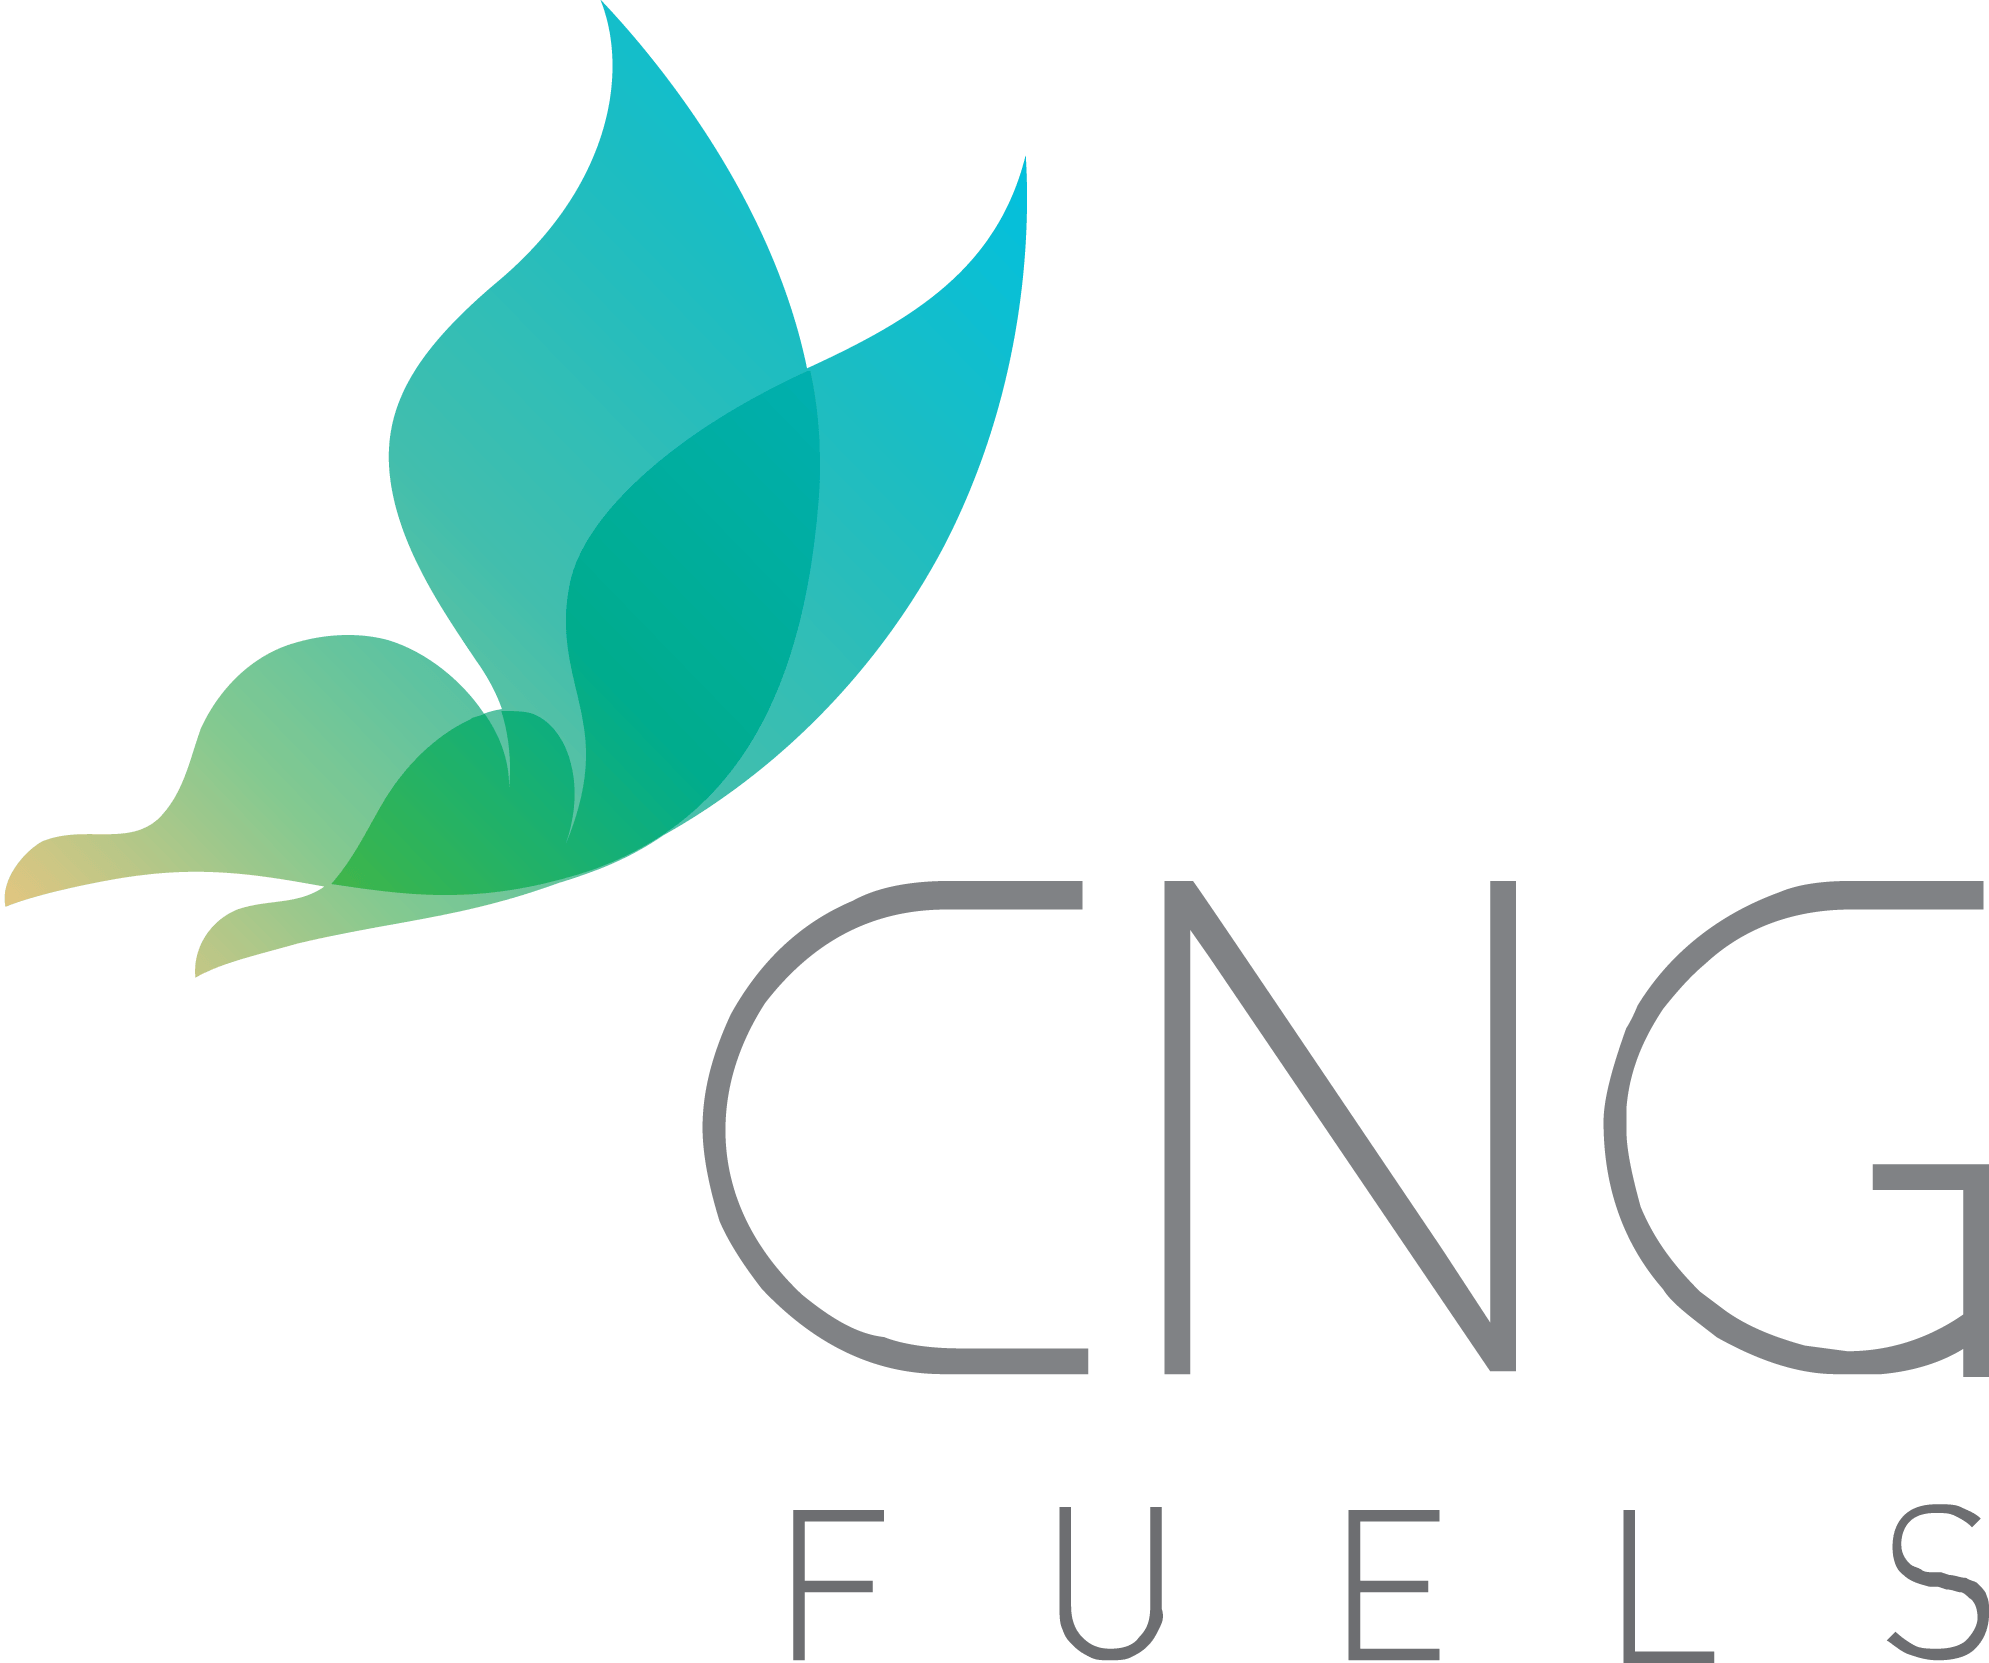 CNG Logo - Homepage - CNG Fuels